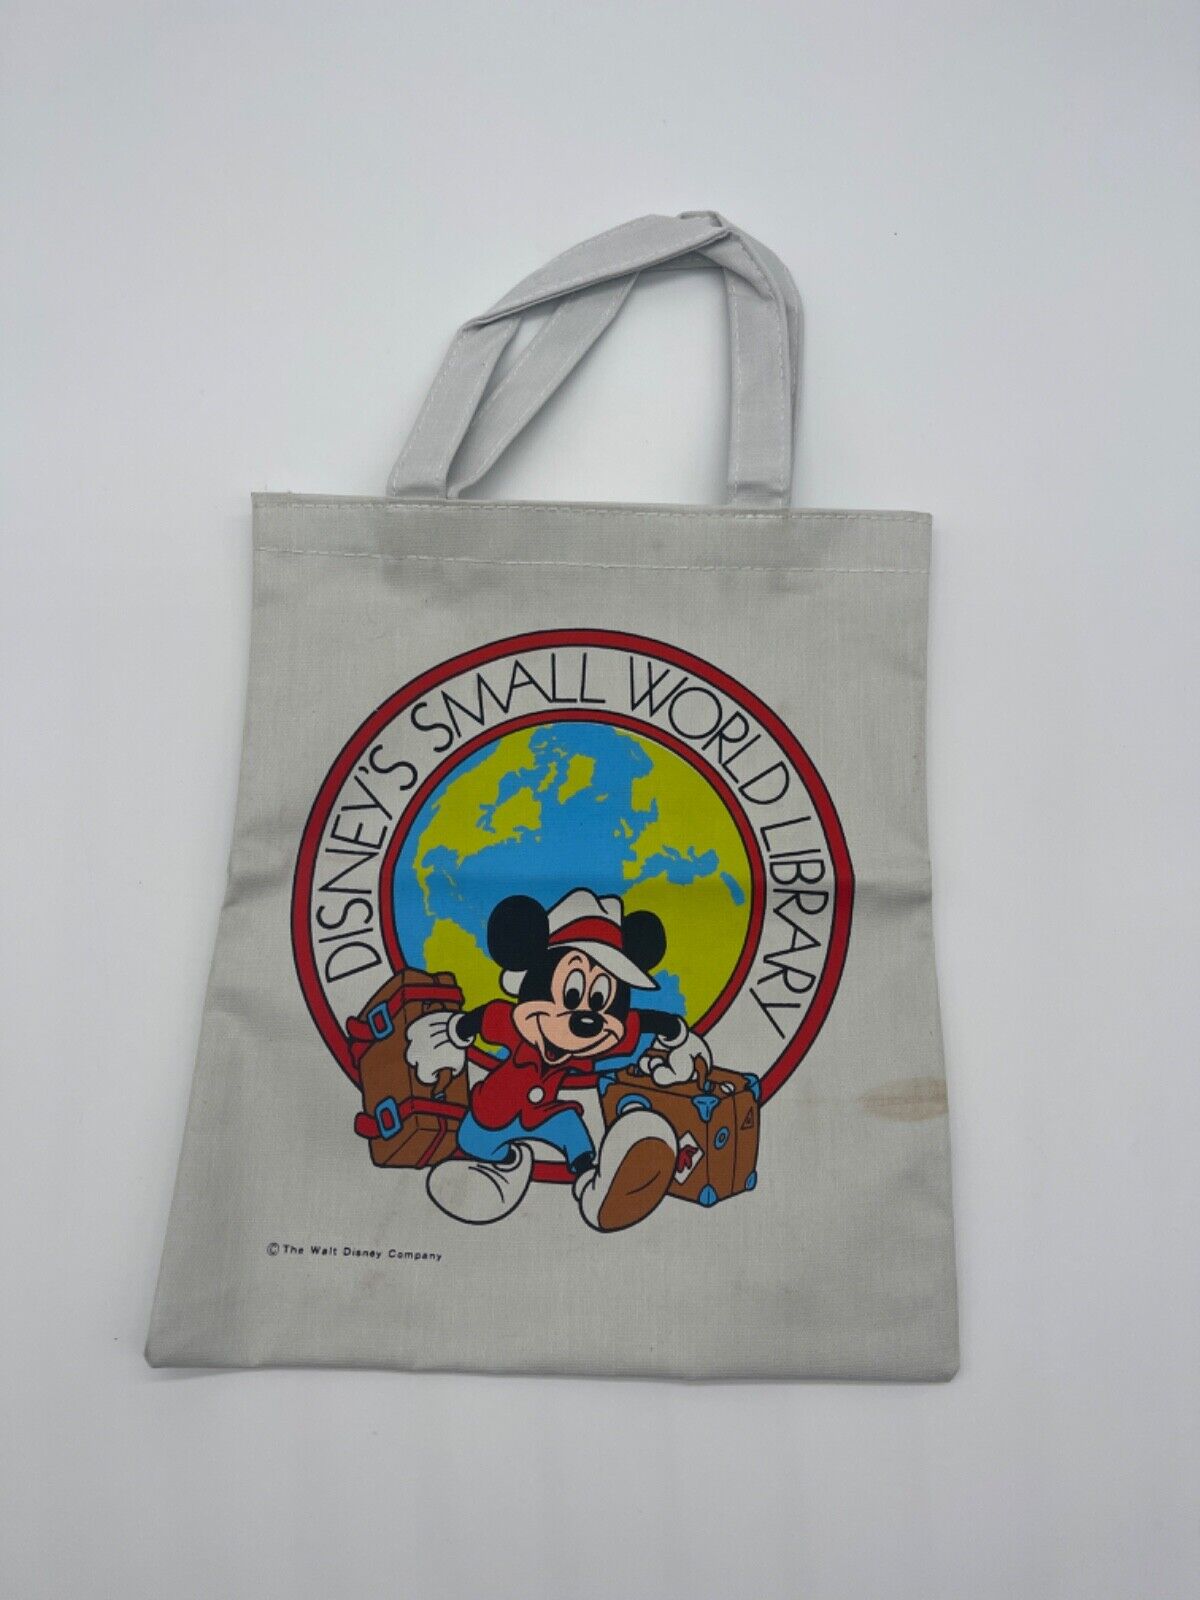 Vintage Disney's Small World Library Mickey Mouse Canvas Tote Bag Book Travel